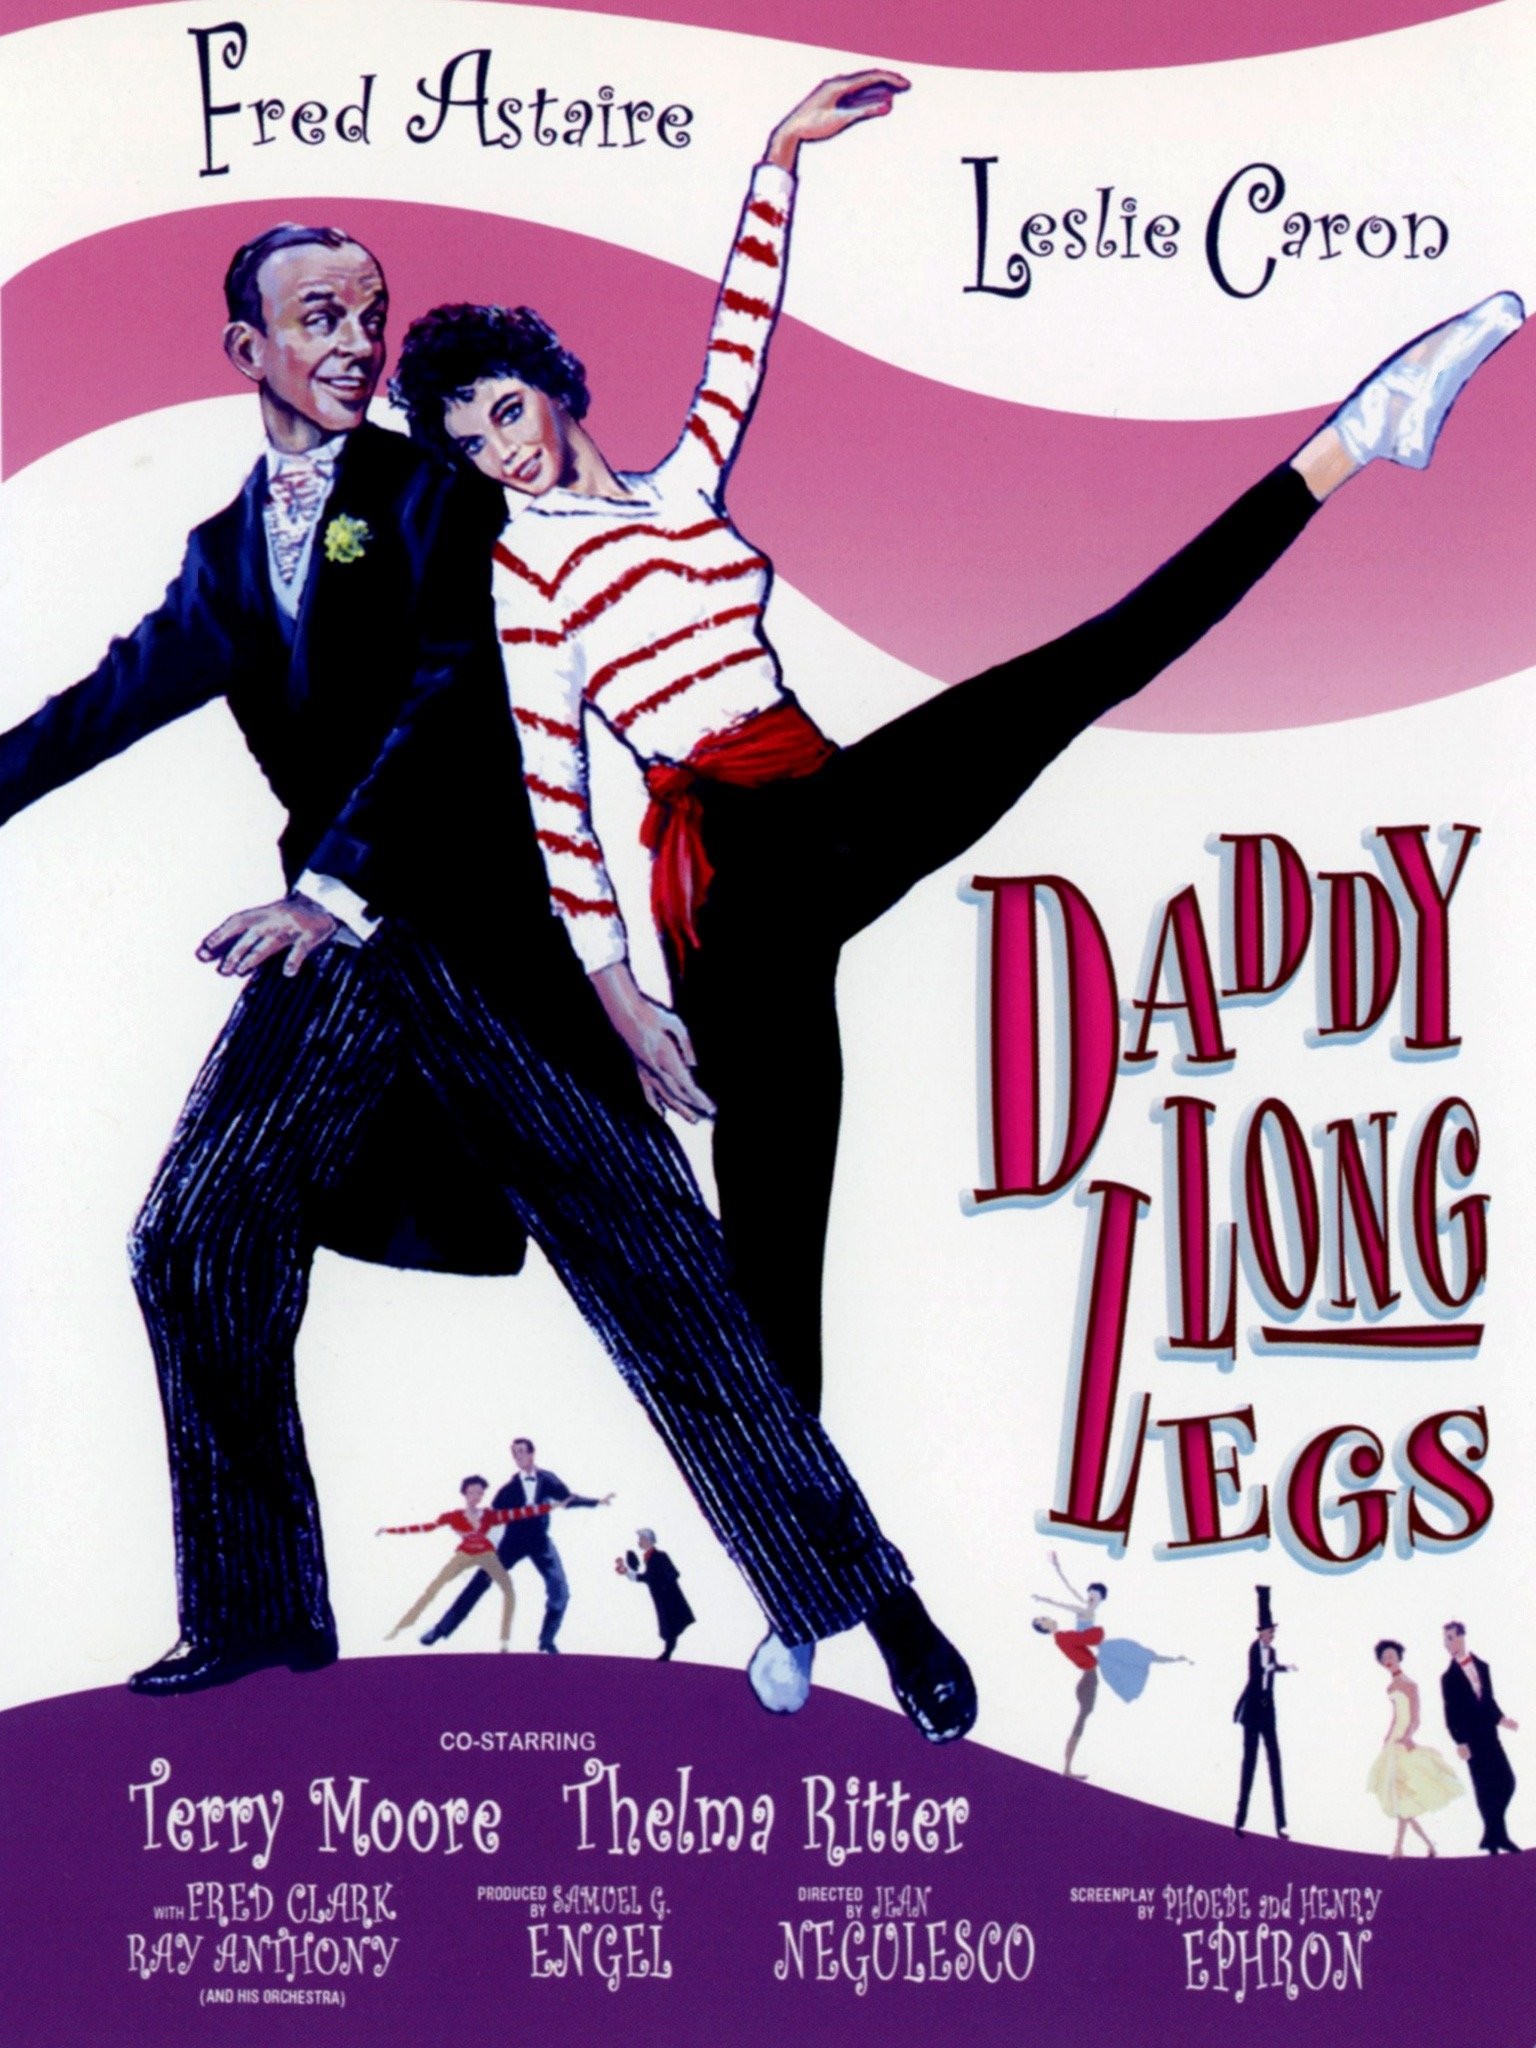 Daddy Long Legs All Fun and Games Until Someone Loses a Leg – or